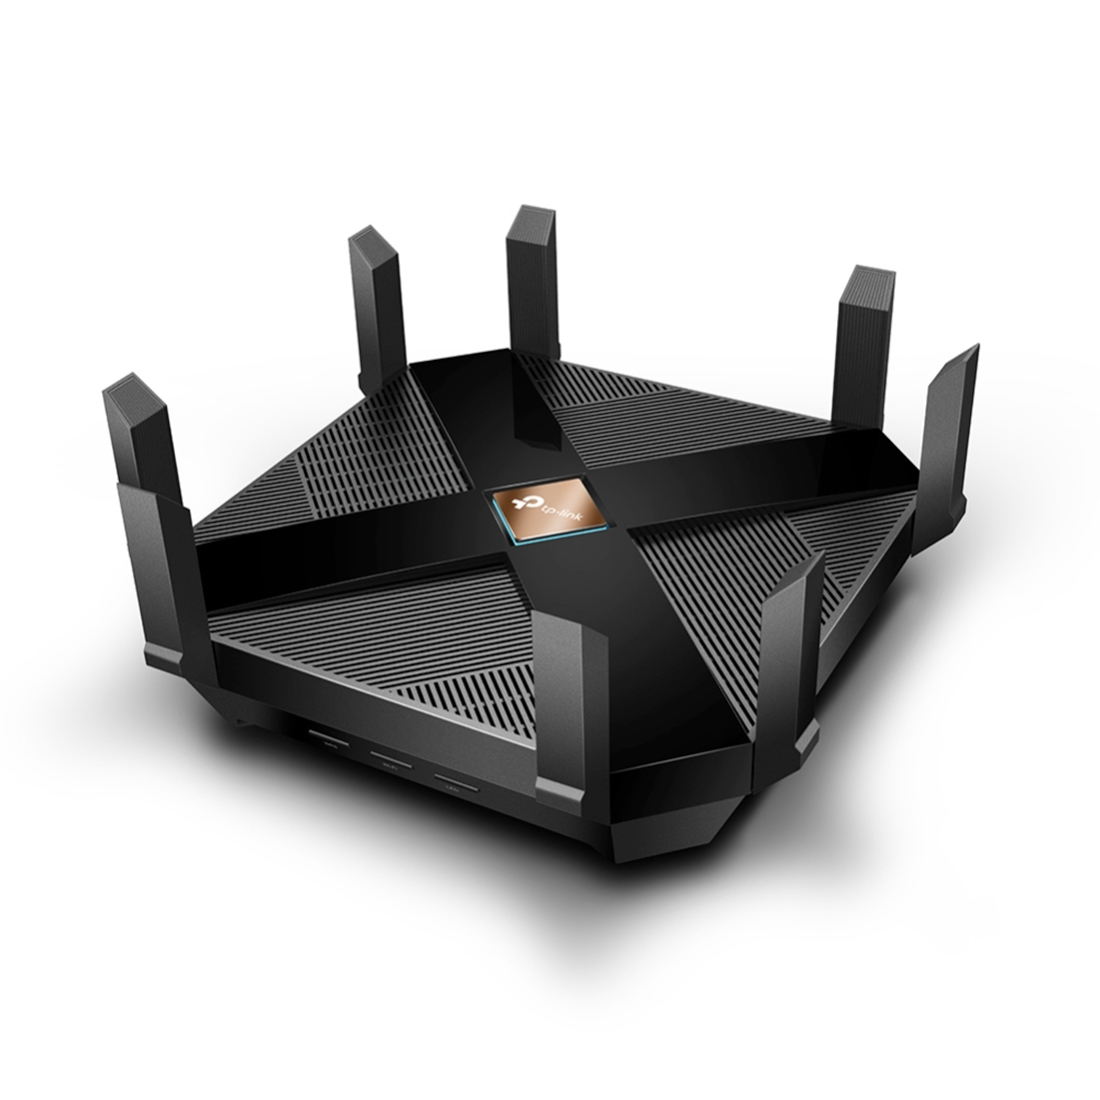 Маршрутизатор, TP-LINK, Archer AX6000, Wi-Fi 6, 802.11ax/ac/n/a 5 ГГц, 802.11ax/n/b/g 2,4 ГГц, 44 MU